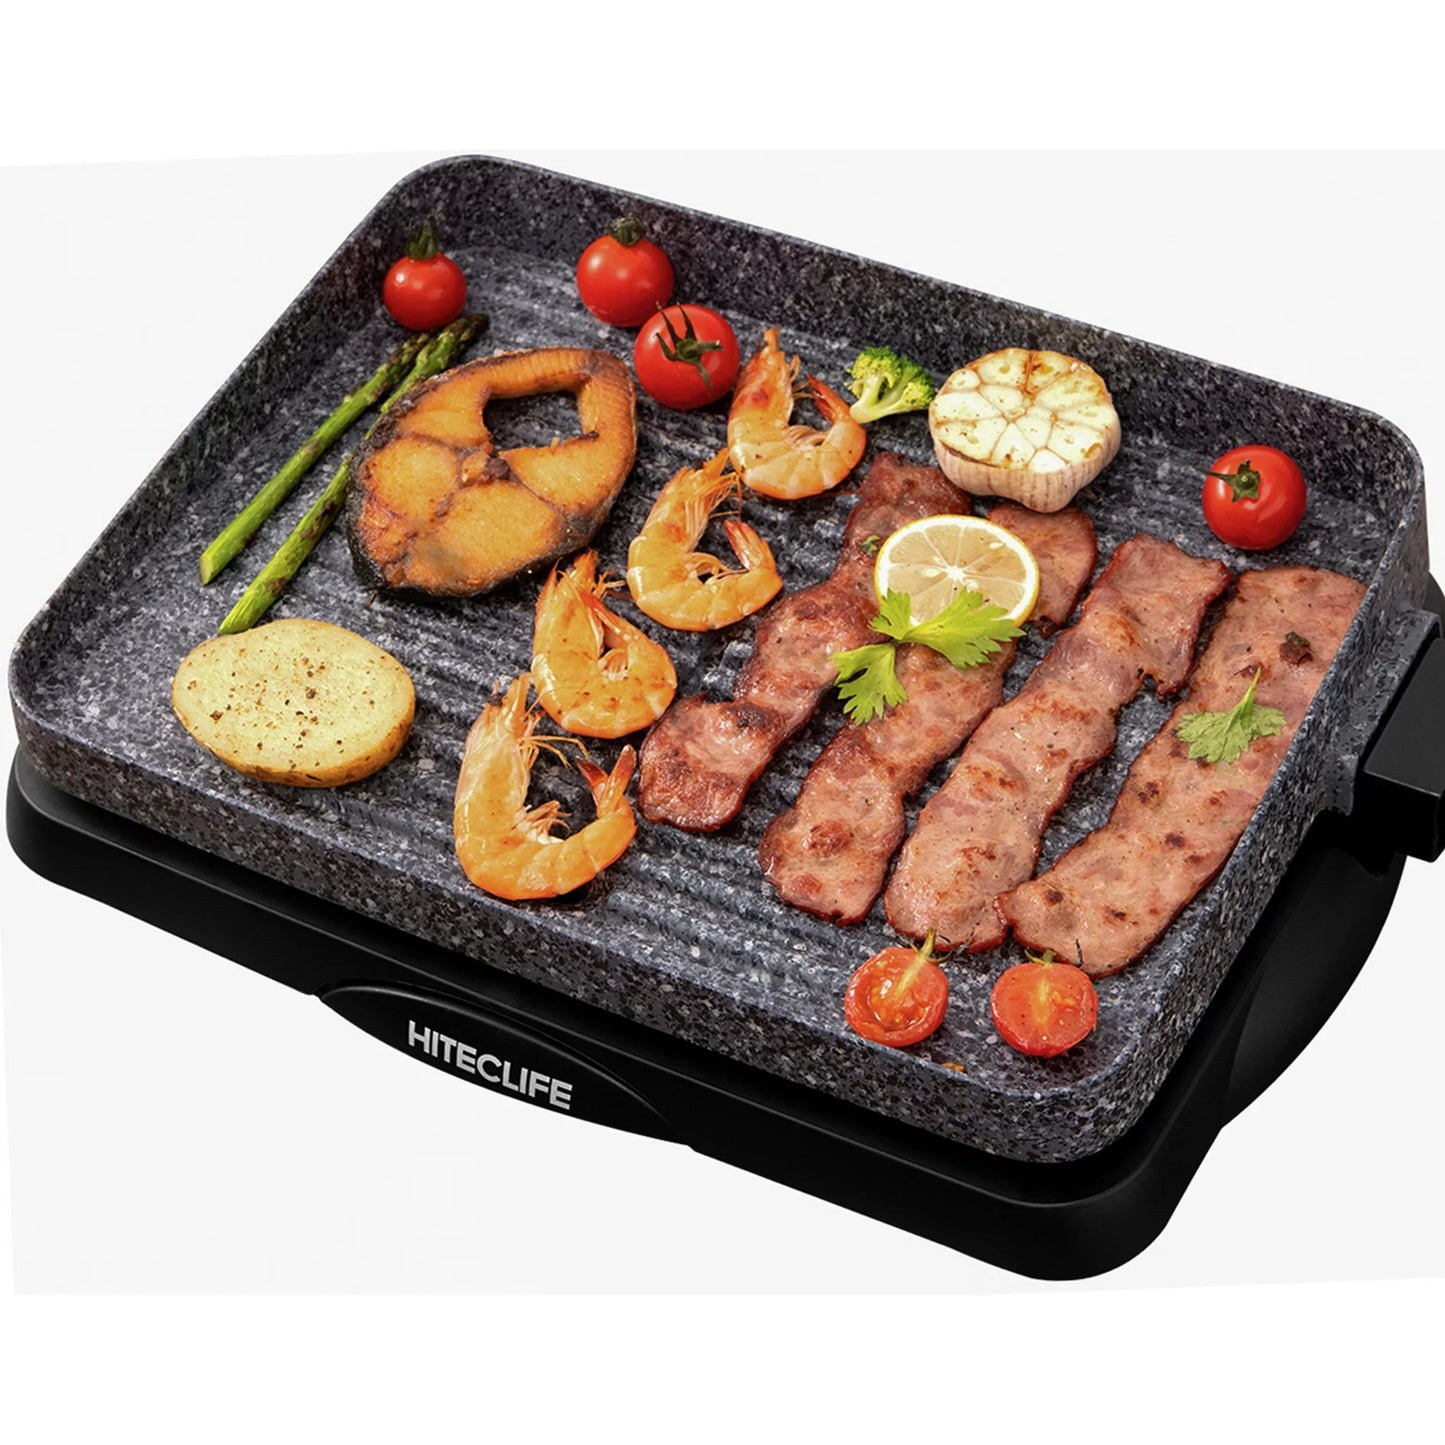 Electric Grill Indoor 1500W Korean BBQ Barbecue Granite Stone Nonstick Detachable Flat Tabletop Smart 5-Heat Plate PFOA-Free Family Size Compact 14 Inch Gray